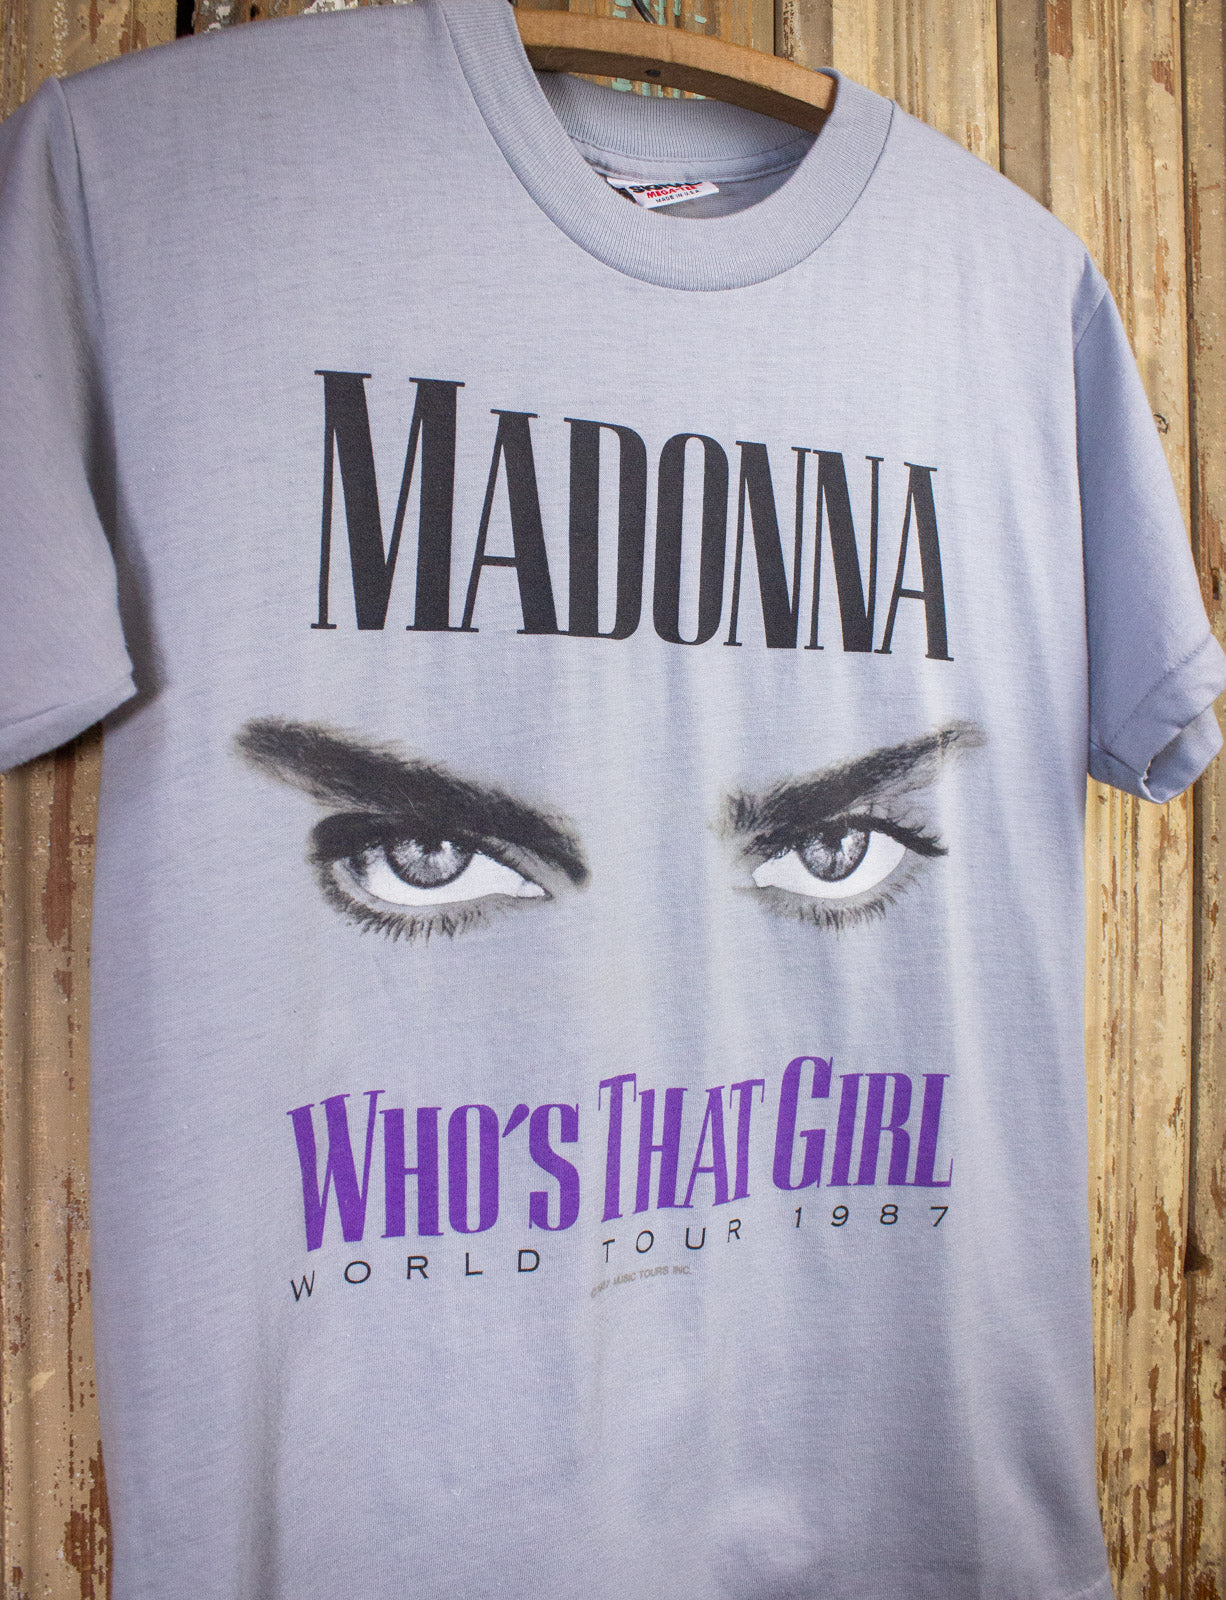 Vintage Madonna Who's That Girl Japan Staff Concert T Shirt Blue Small